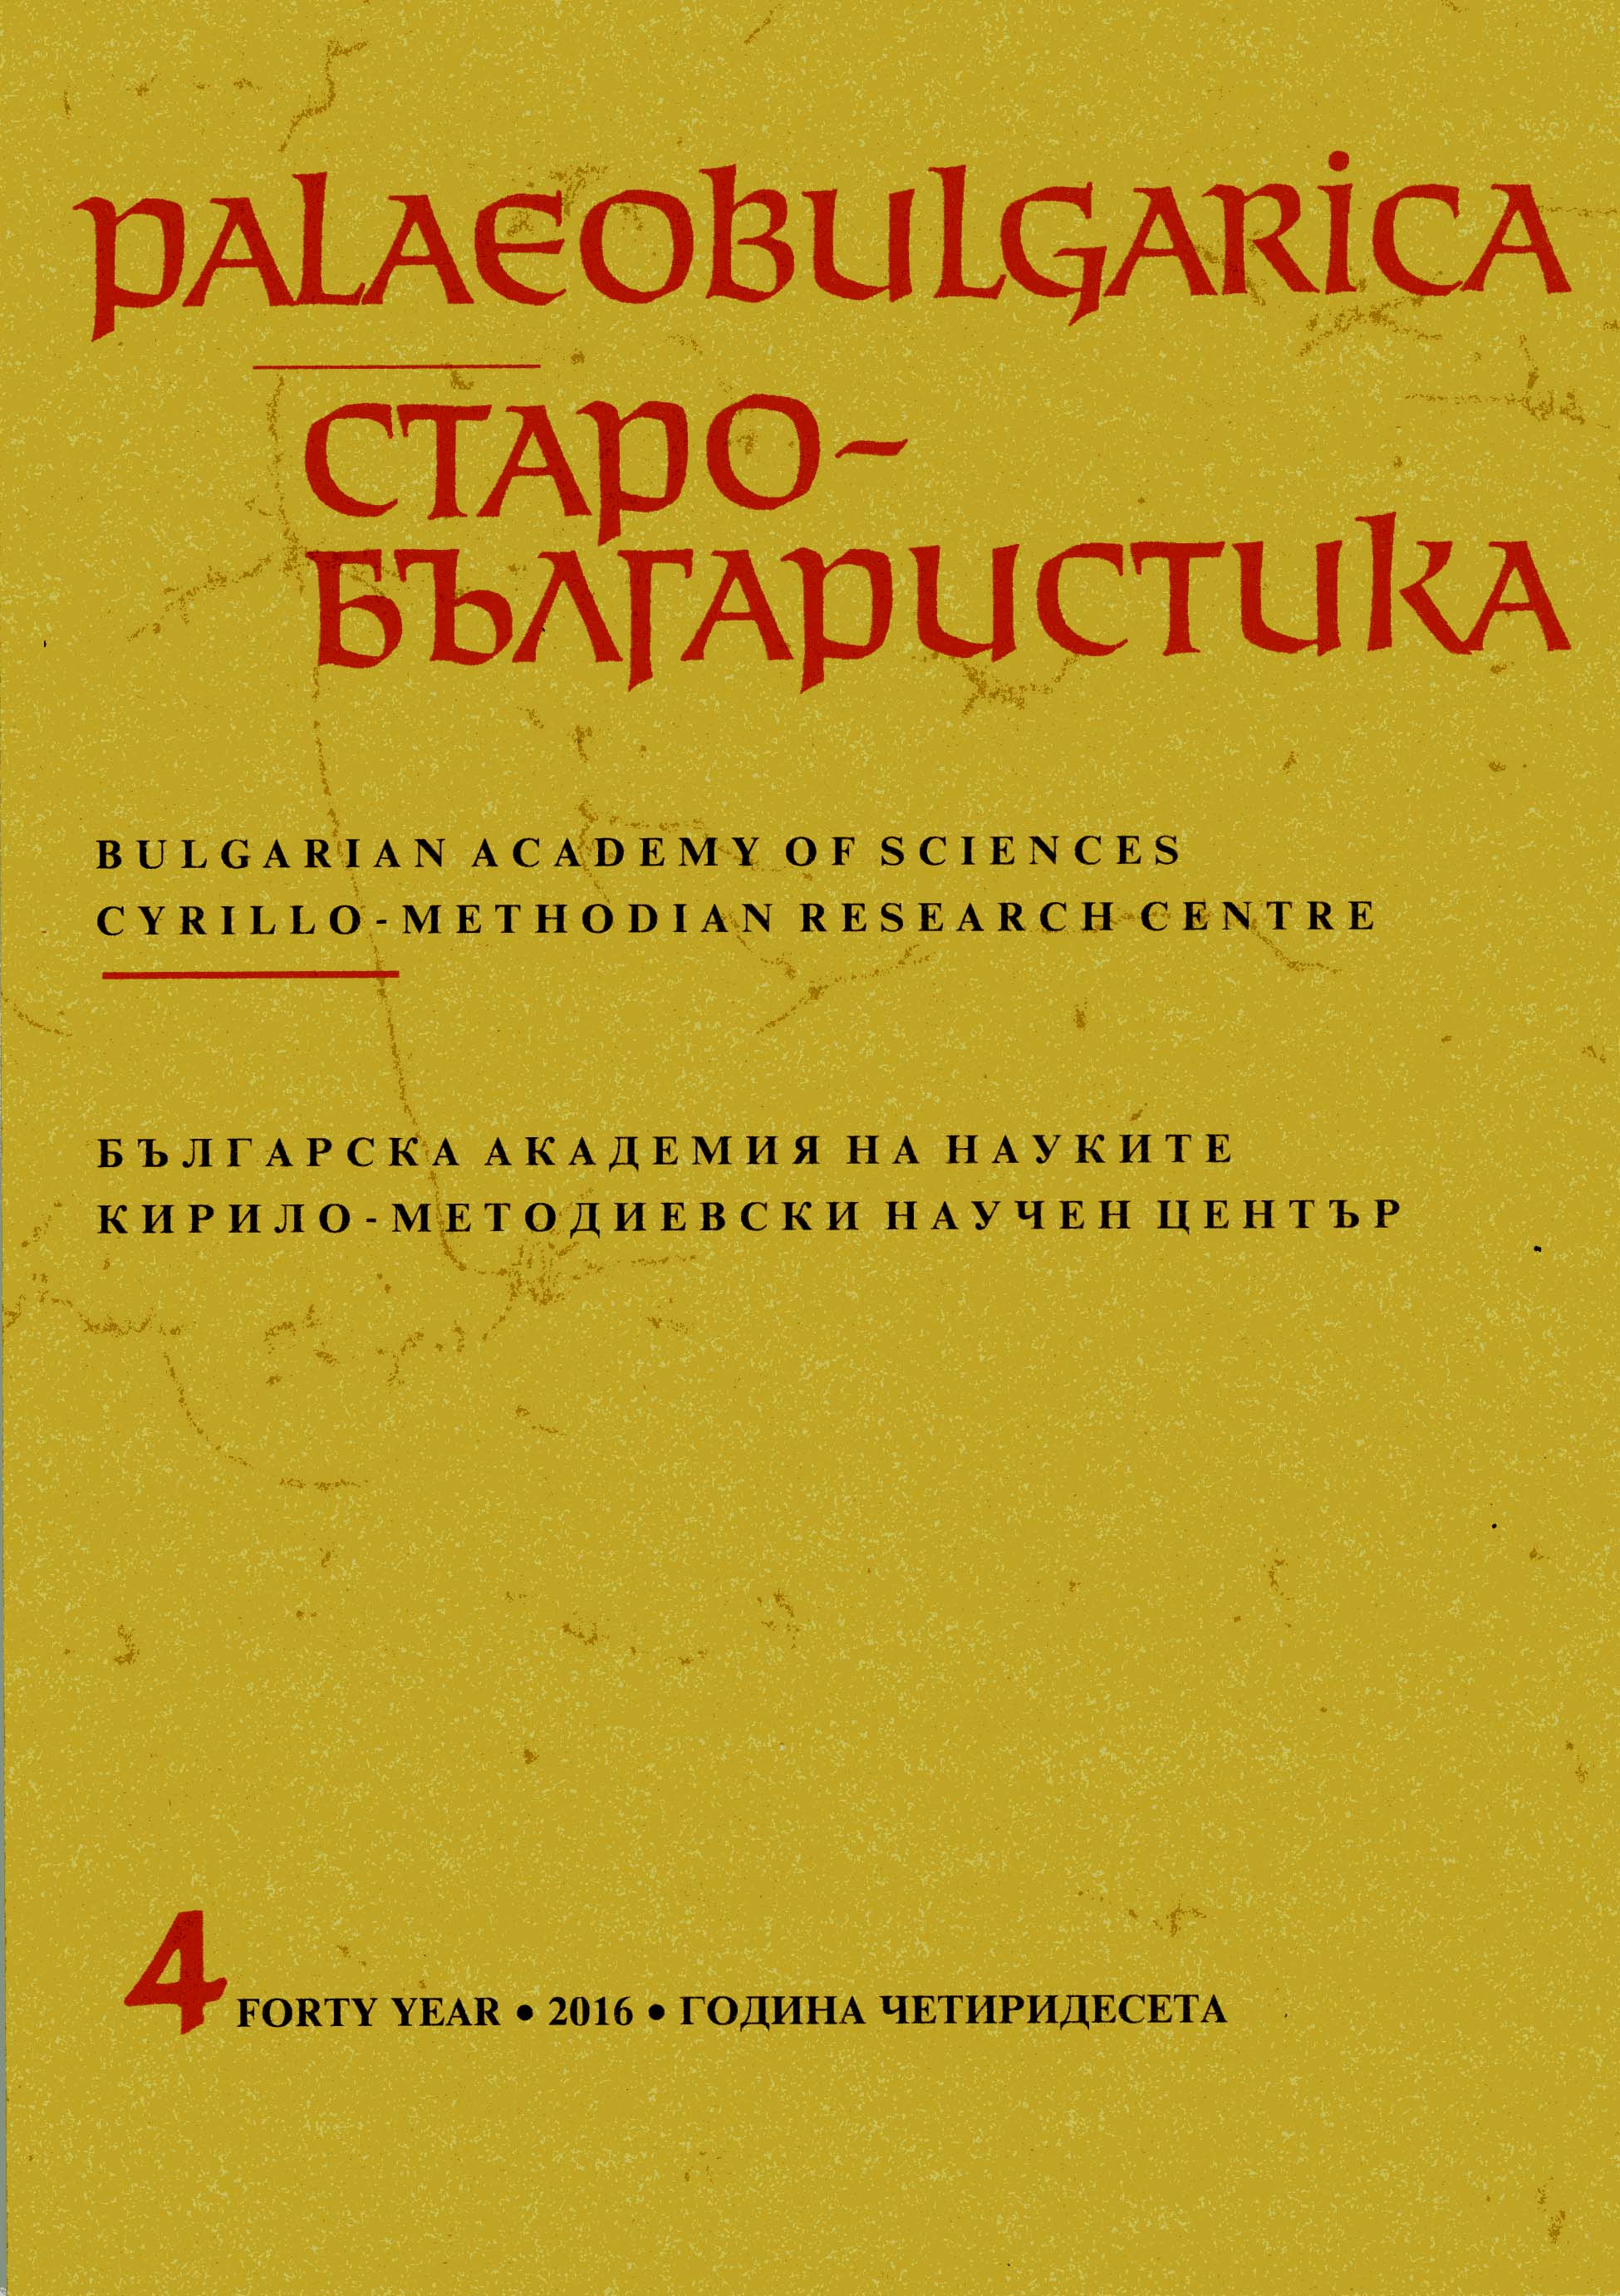 The Life of the Holy Empress Theophano in Cyrillic Manuscripts from the Balkans: Archaeographical Notes on the Preserved Slavic Copies Cover Image